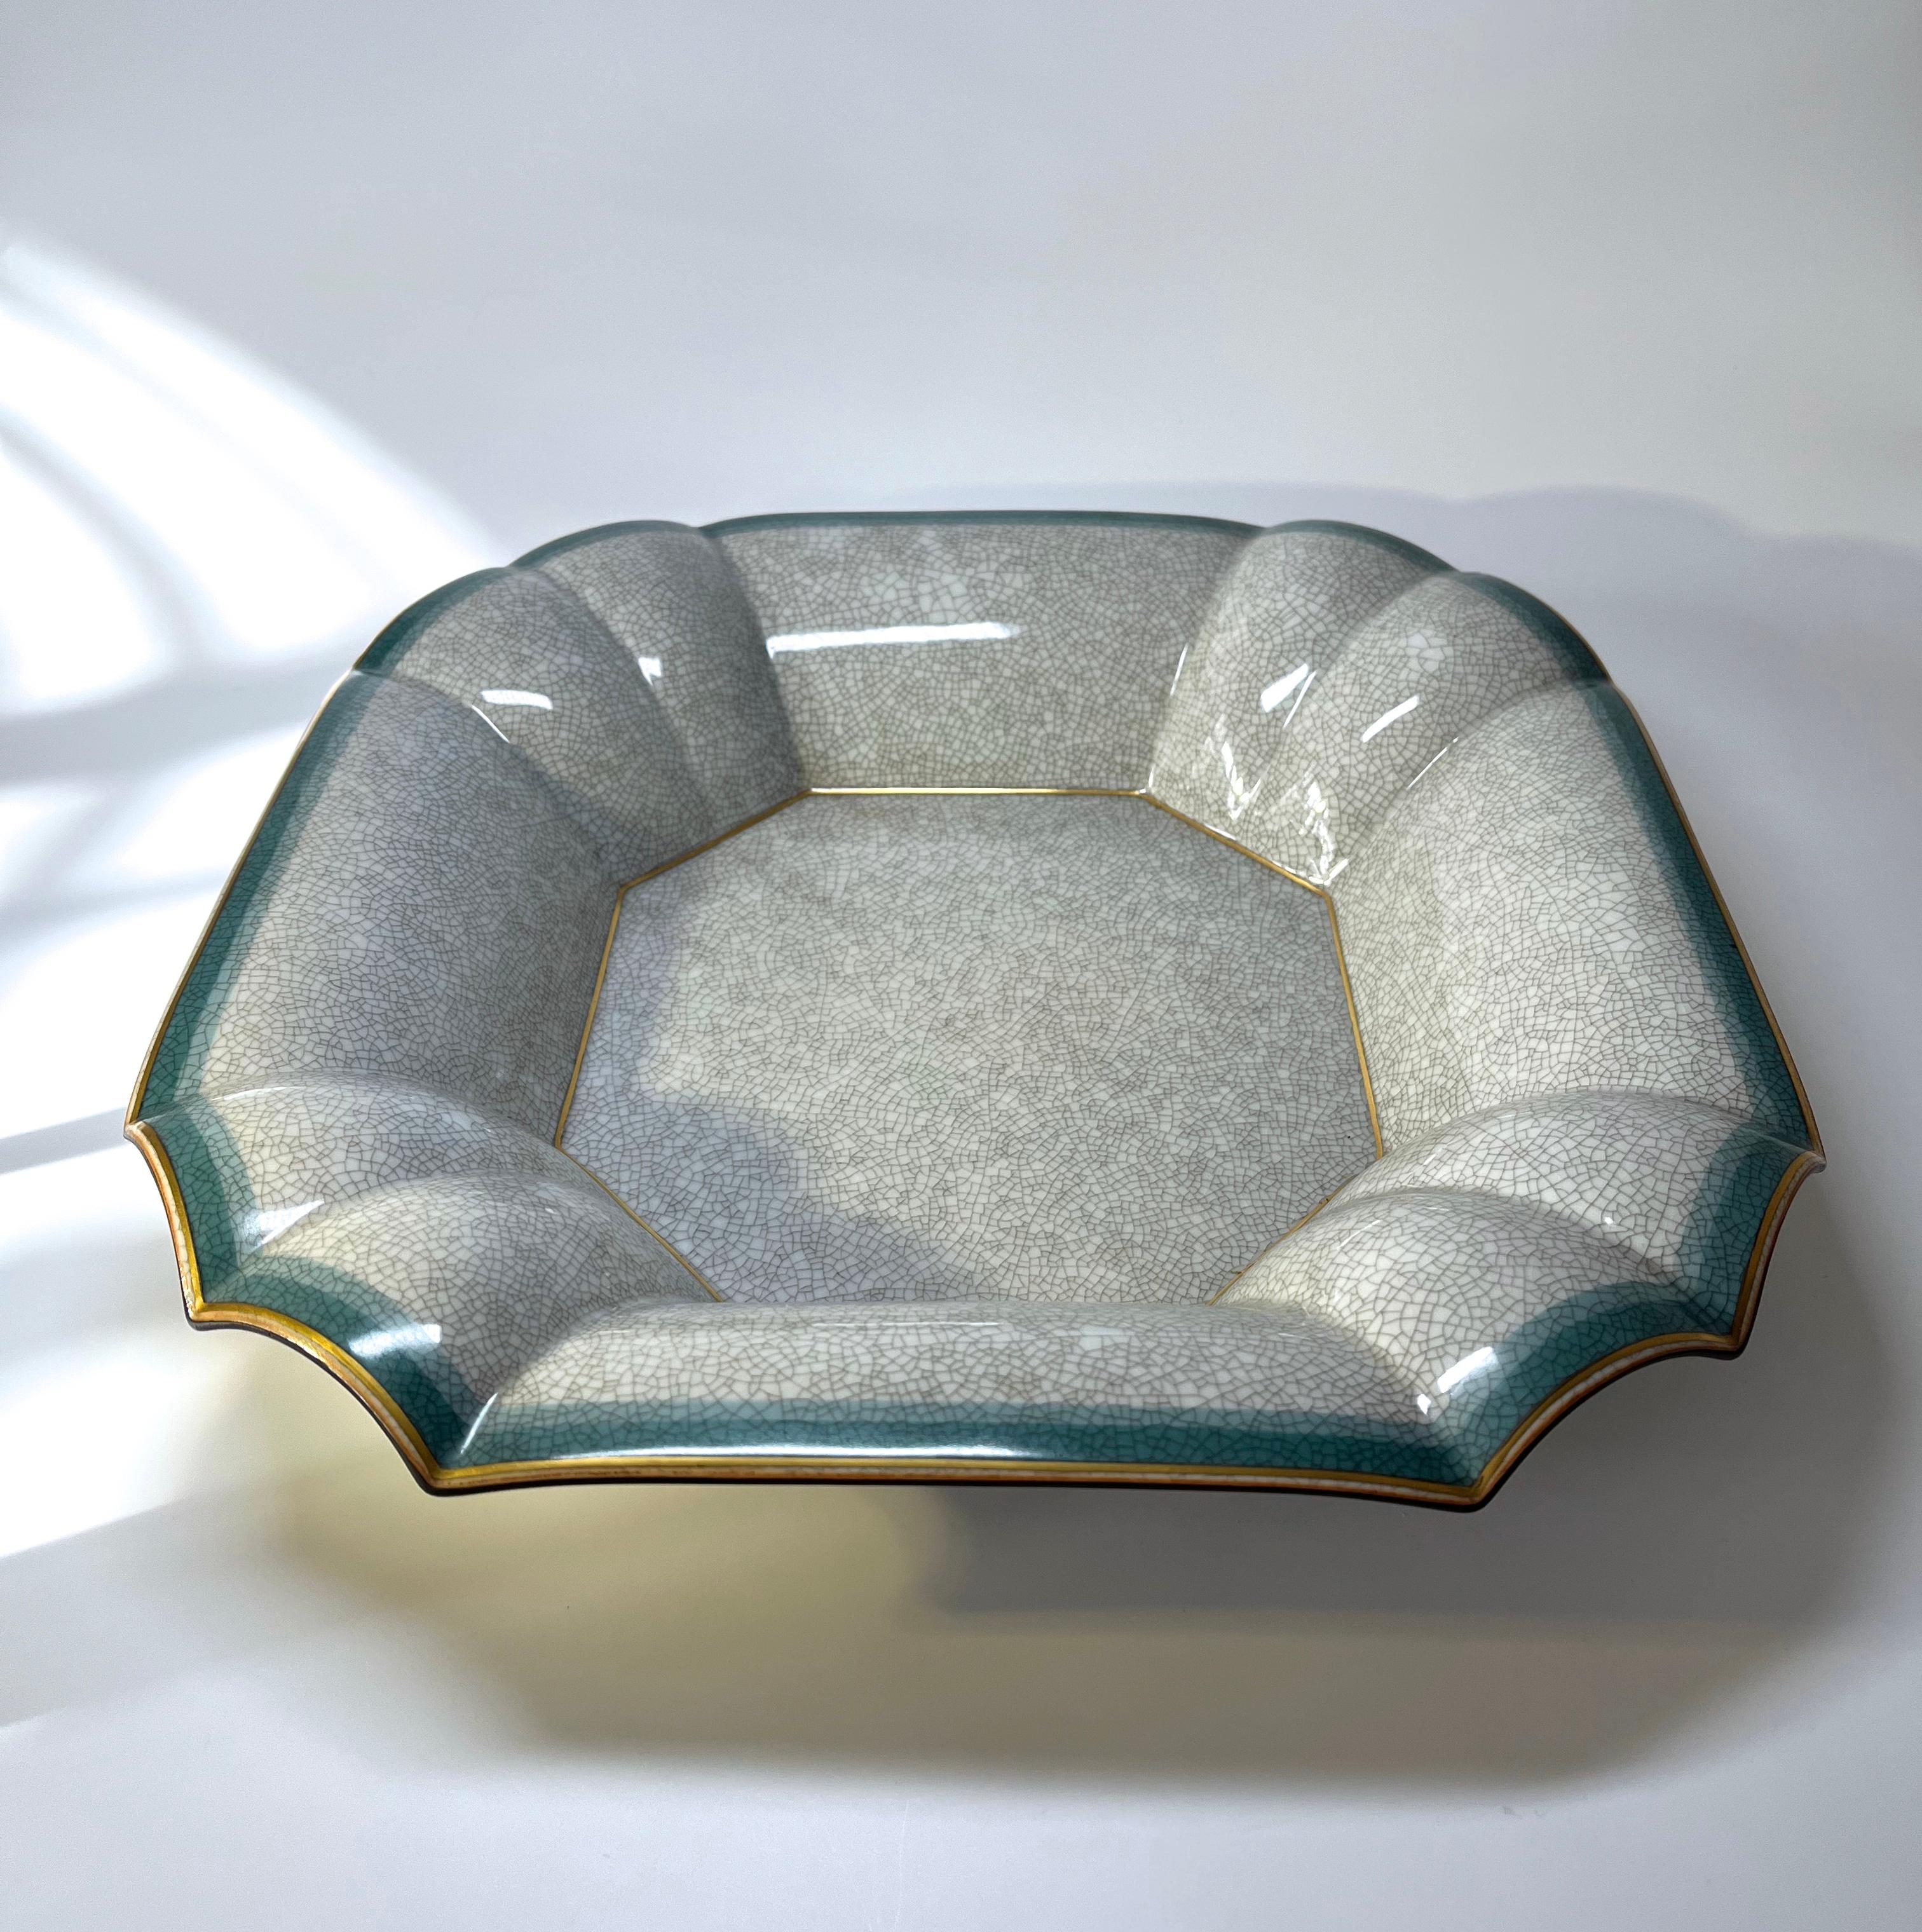 A most unusual dual purpose porcelain piece designed by Thorkild Olsen for Royal Copenhagen
The sizeable piece can be used either as a bowl or wall hanging
Outer rim is banded with gilding and two tones of teal, the centre is a soft grey crackle